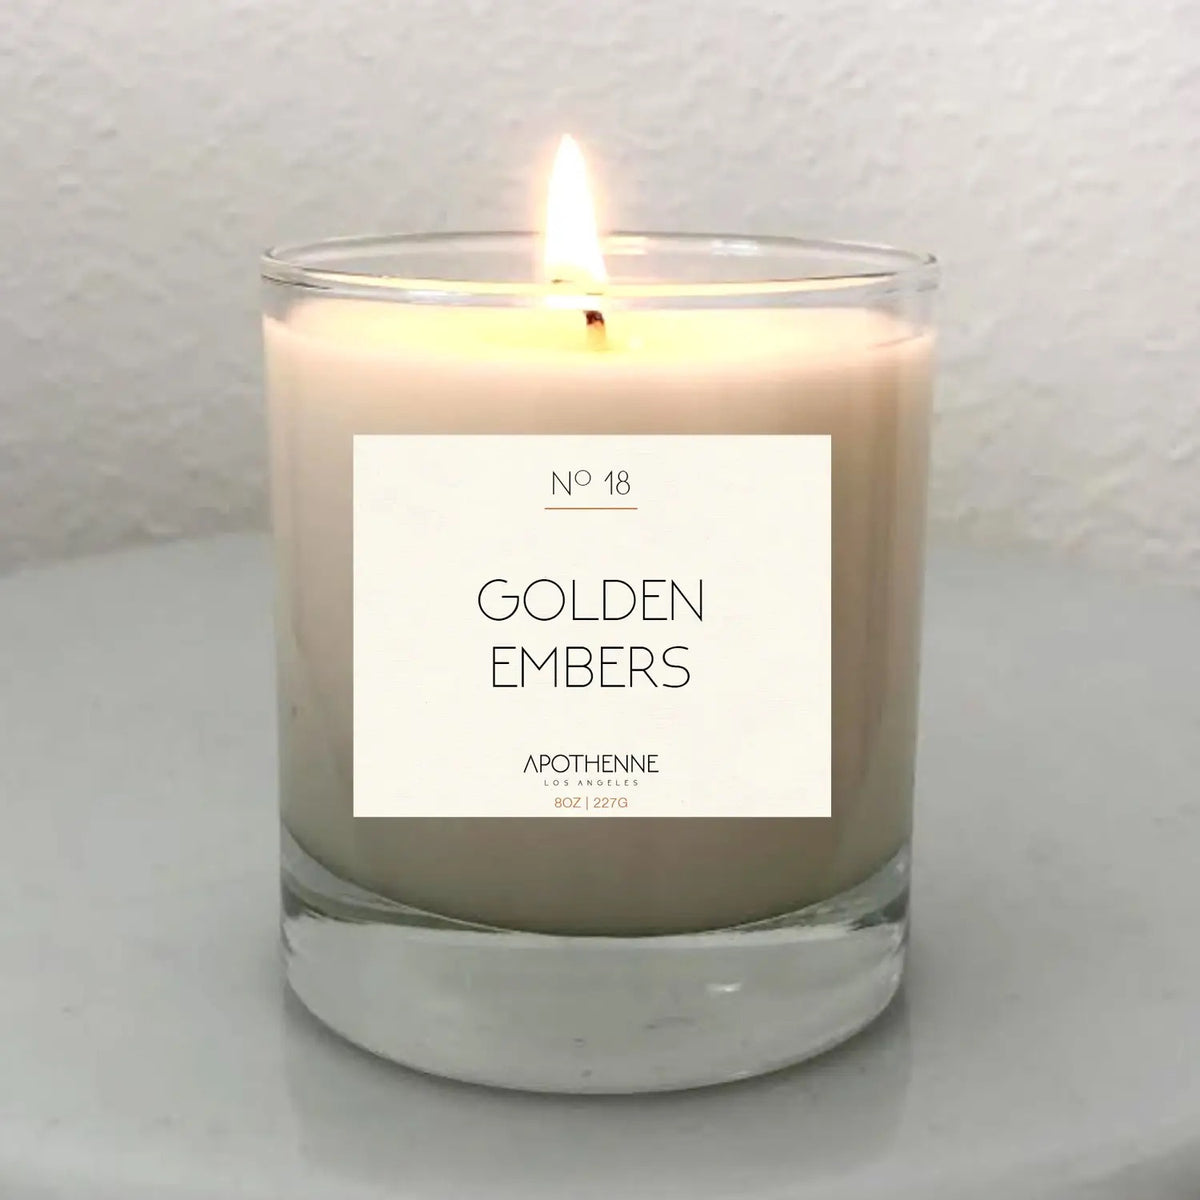 APOTHENNE LA Golden Embers Candle